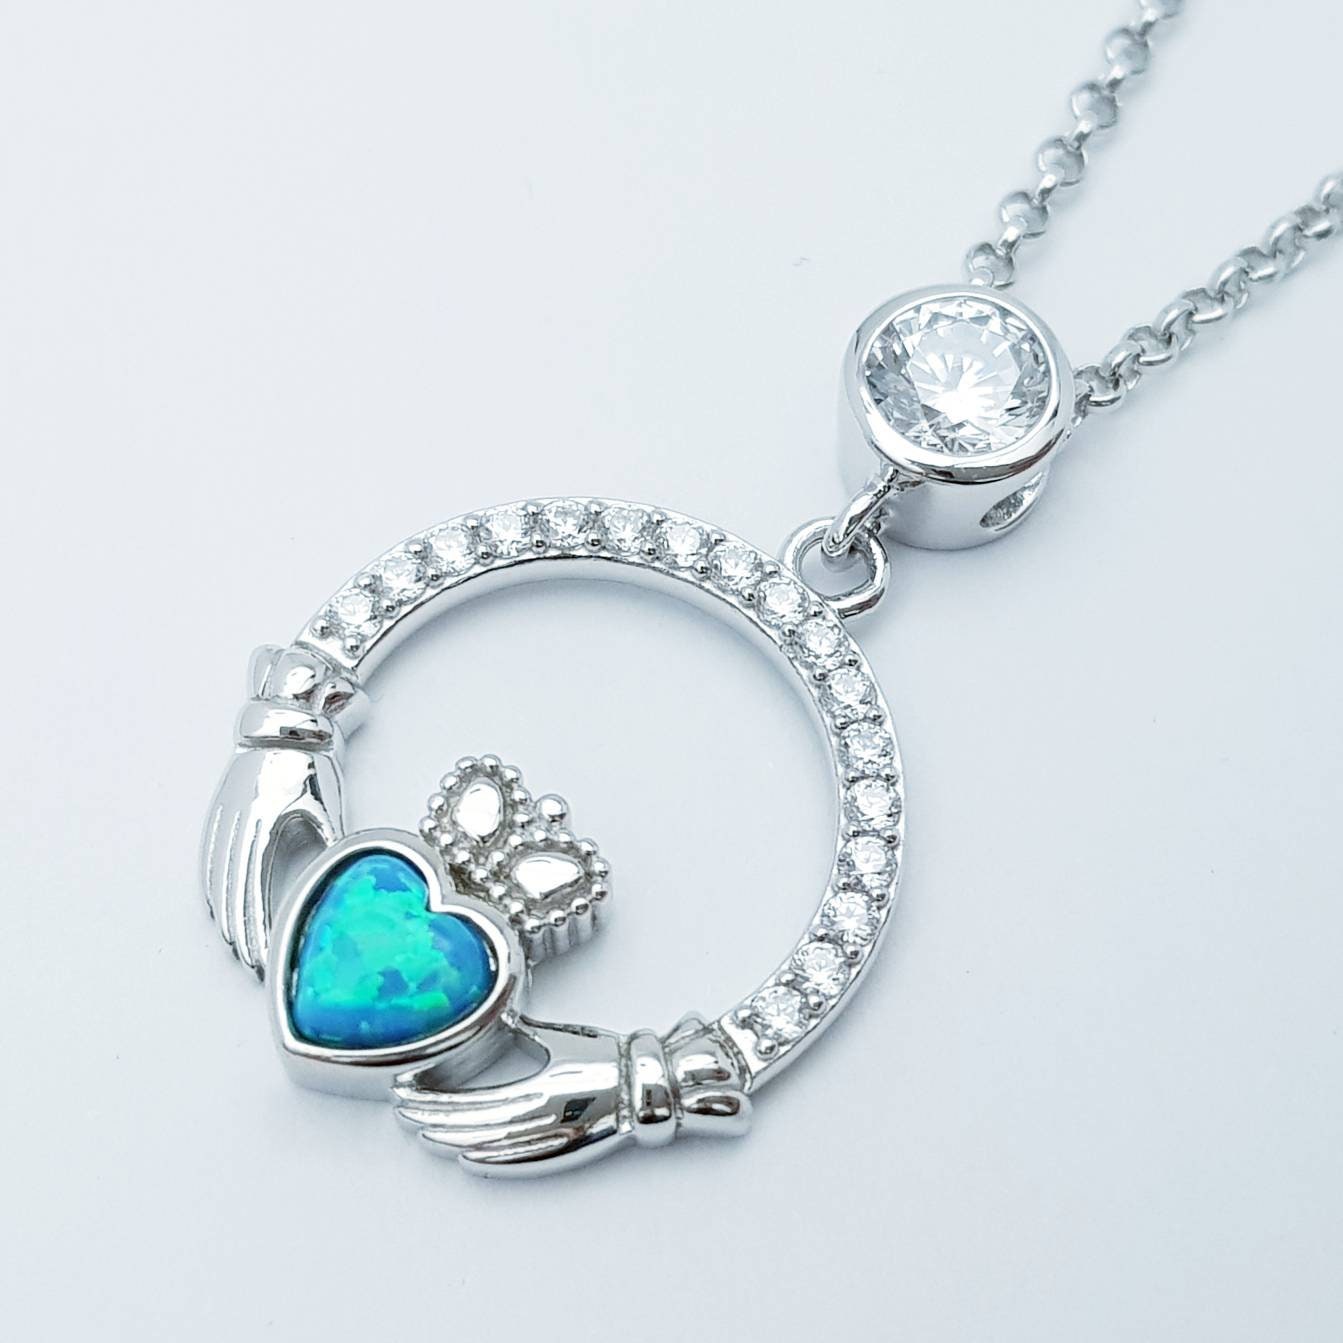 Opal Claddagh pendant, claddagh necklace, sterling silver opal jewelry